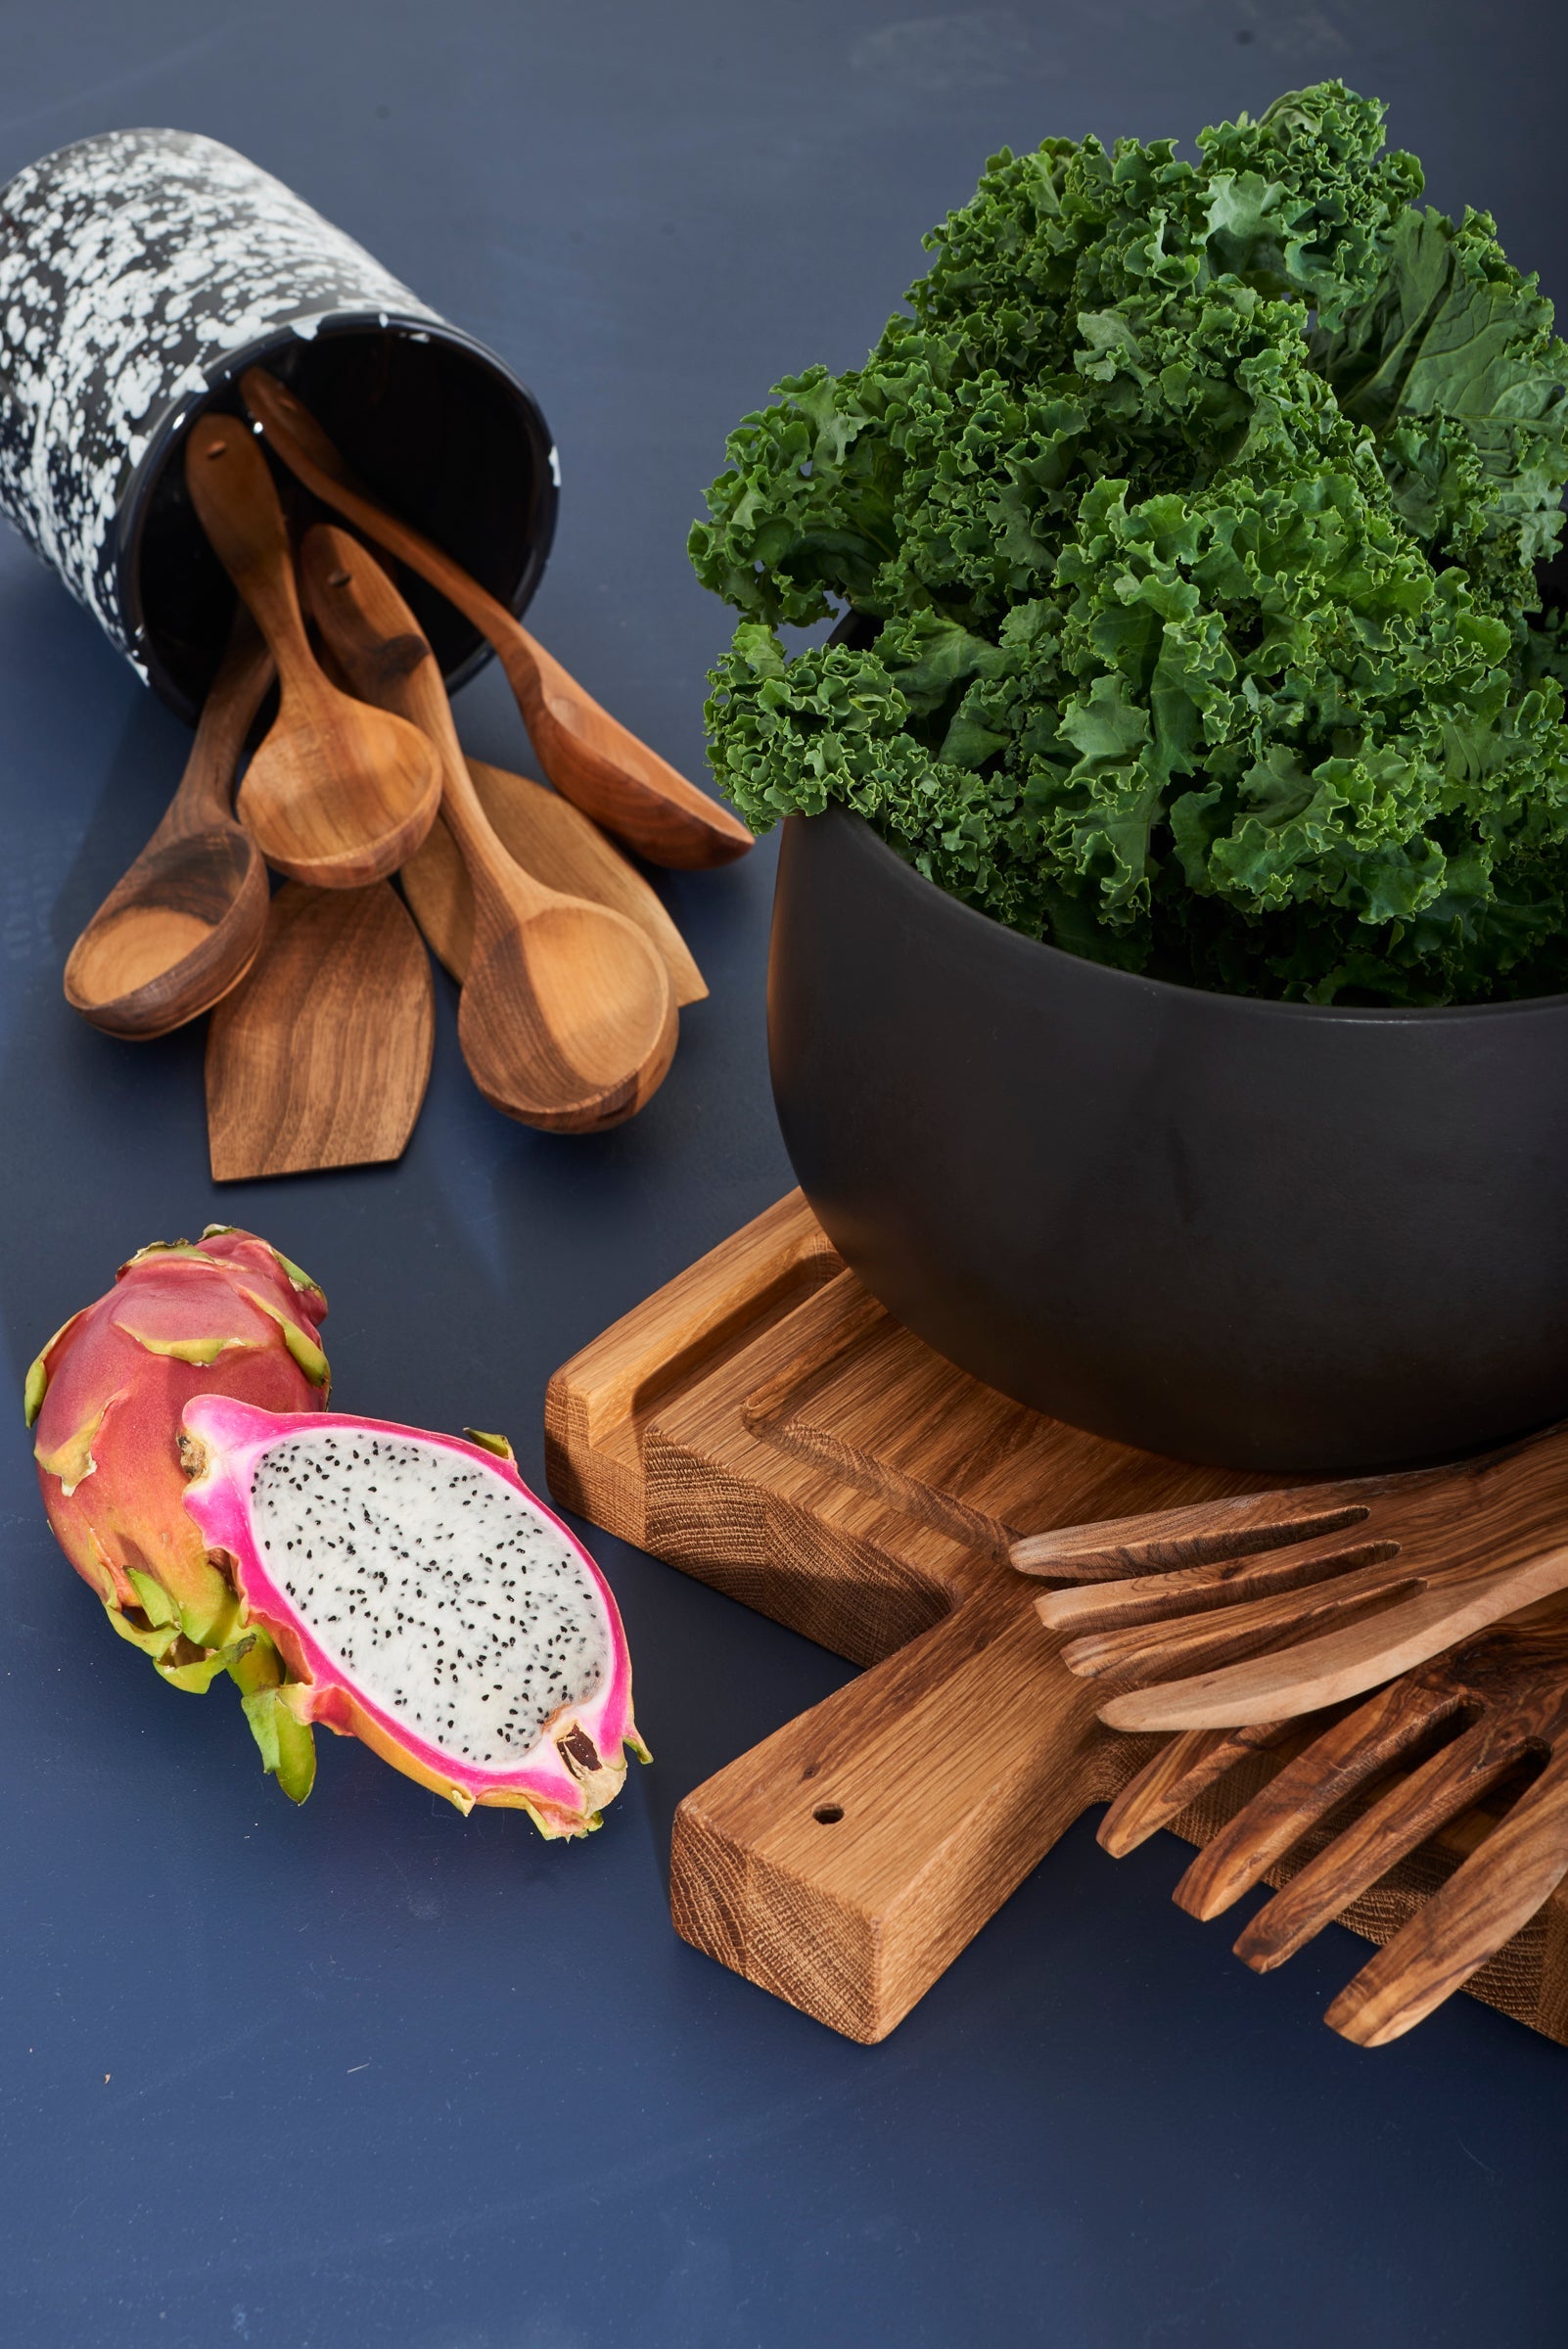 Some objects from around the kitchen are laid out on a dark blue background, including a black bowl filled with kale, wooden spoons and salad scoopers, a wood cutting board and a dragon fruit cut in half.